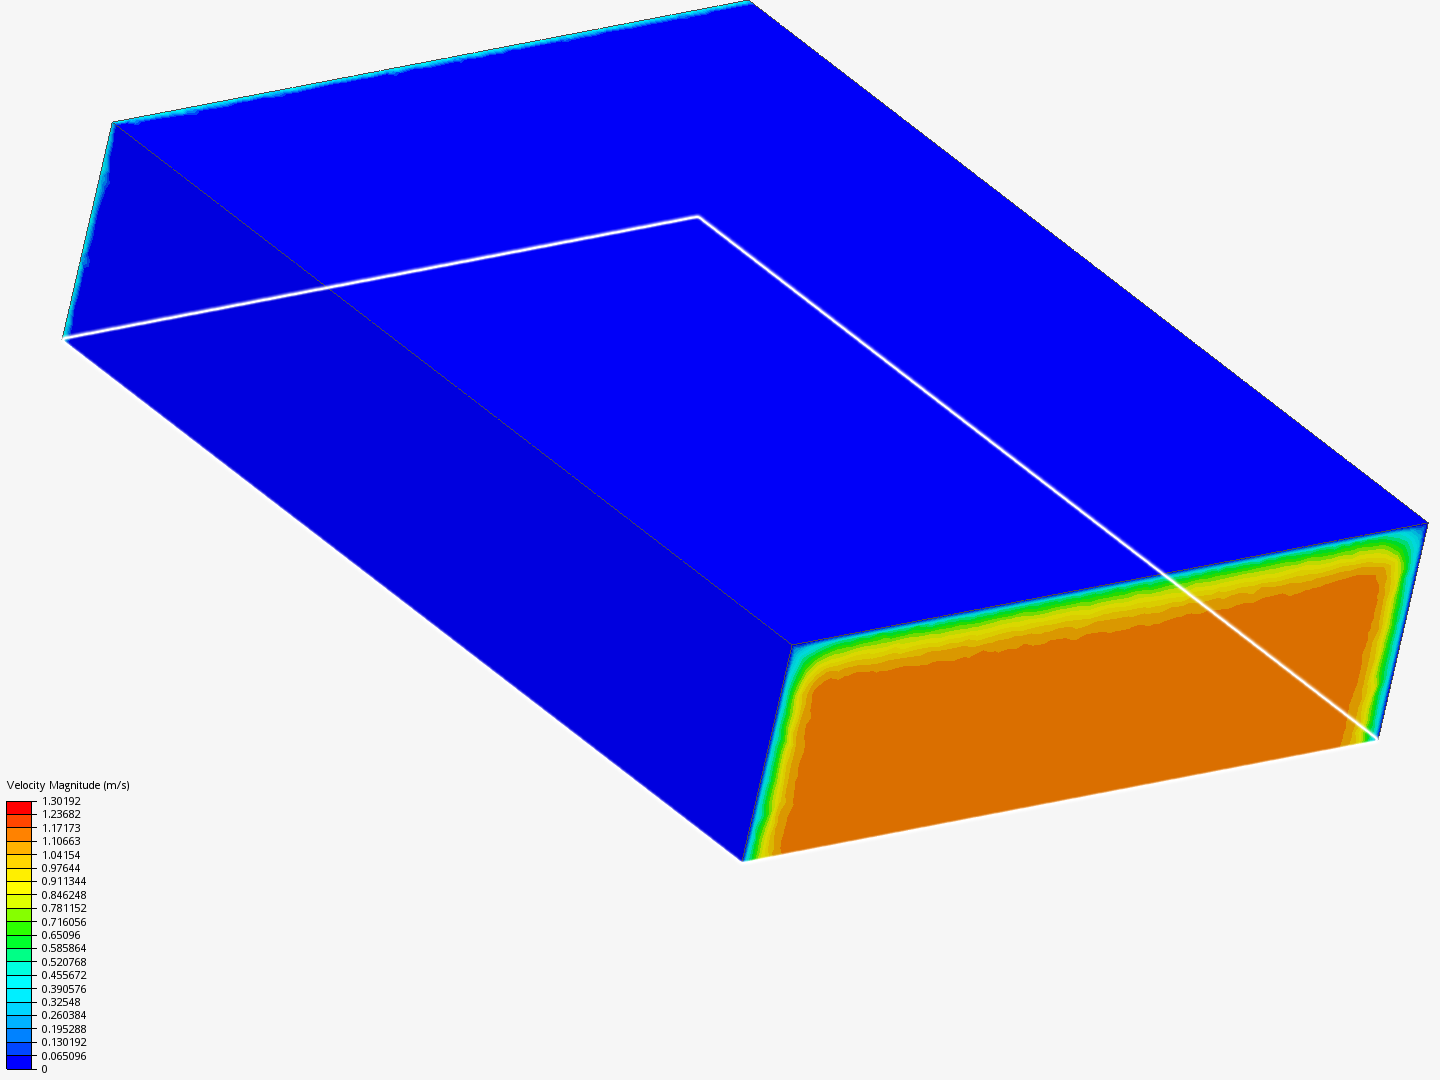 Water flow simulation: grids image